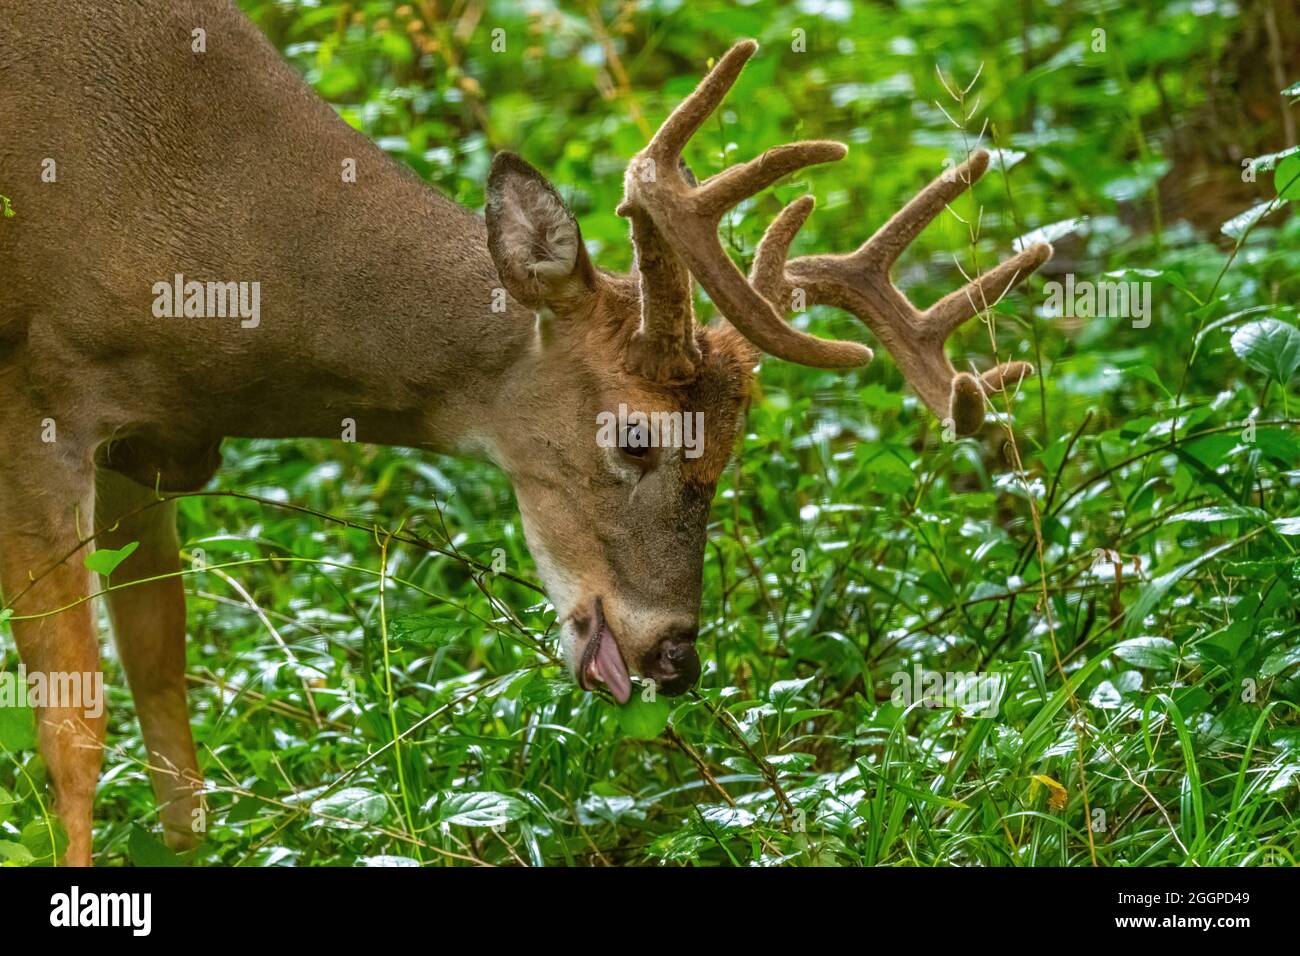 A Male White Tailed Deer (Odocoileus virginianus) Buck with large antlers eating leaves in a forest  in Michigan, USA. Stock Photo